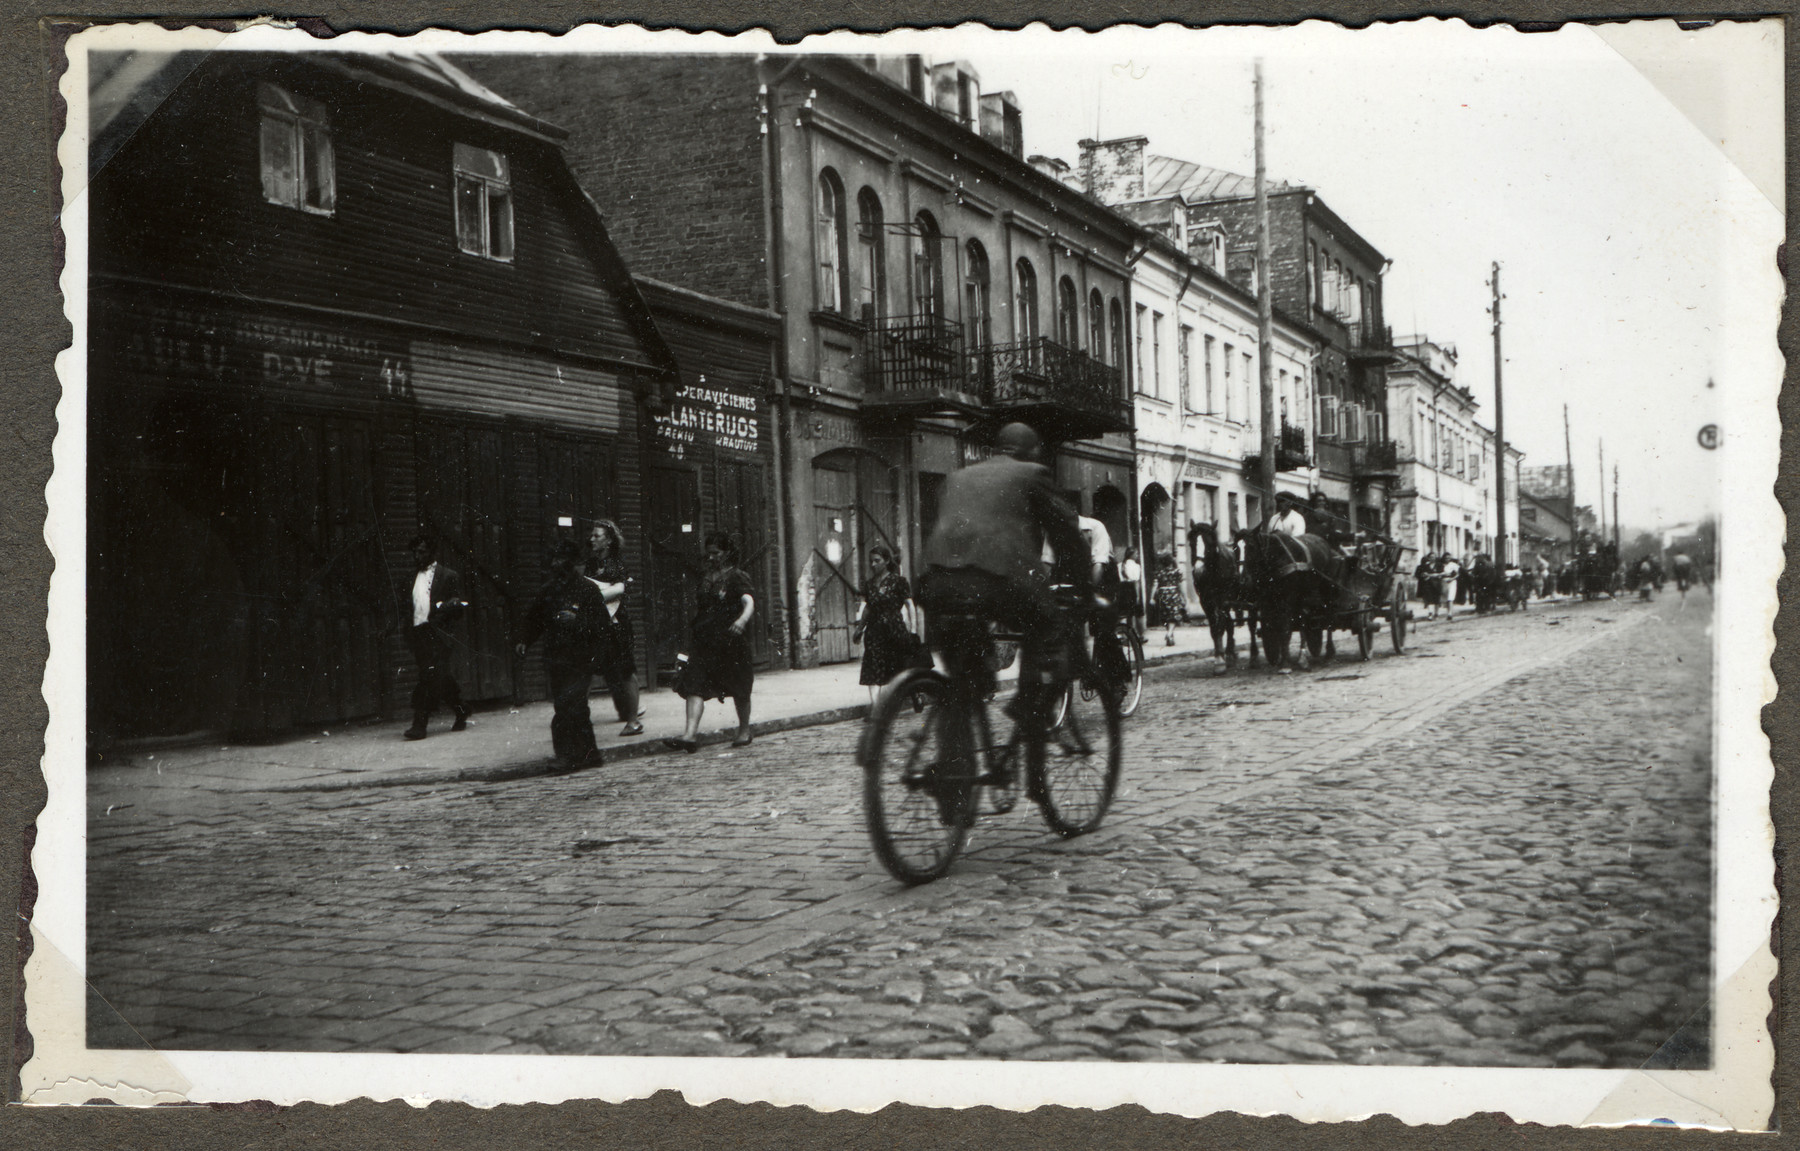 A Lithuanian man rides his bicycle down a street in Kaunas while in the other direction Jews move their belongings on carts and wagons to the new ghetto located across the river in Slobodka.